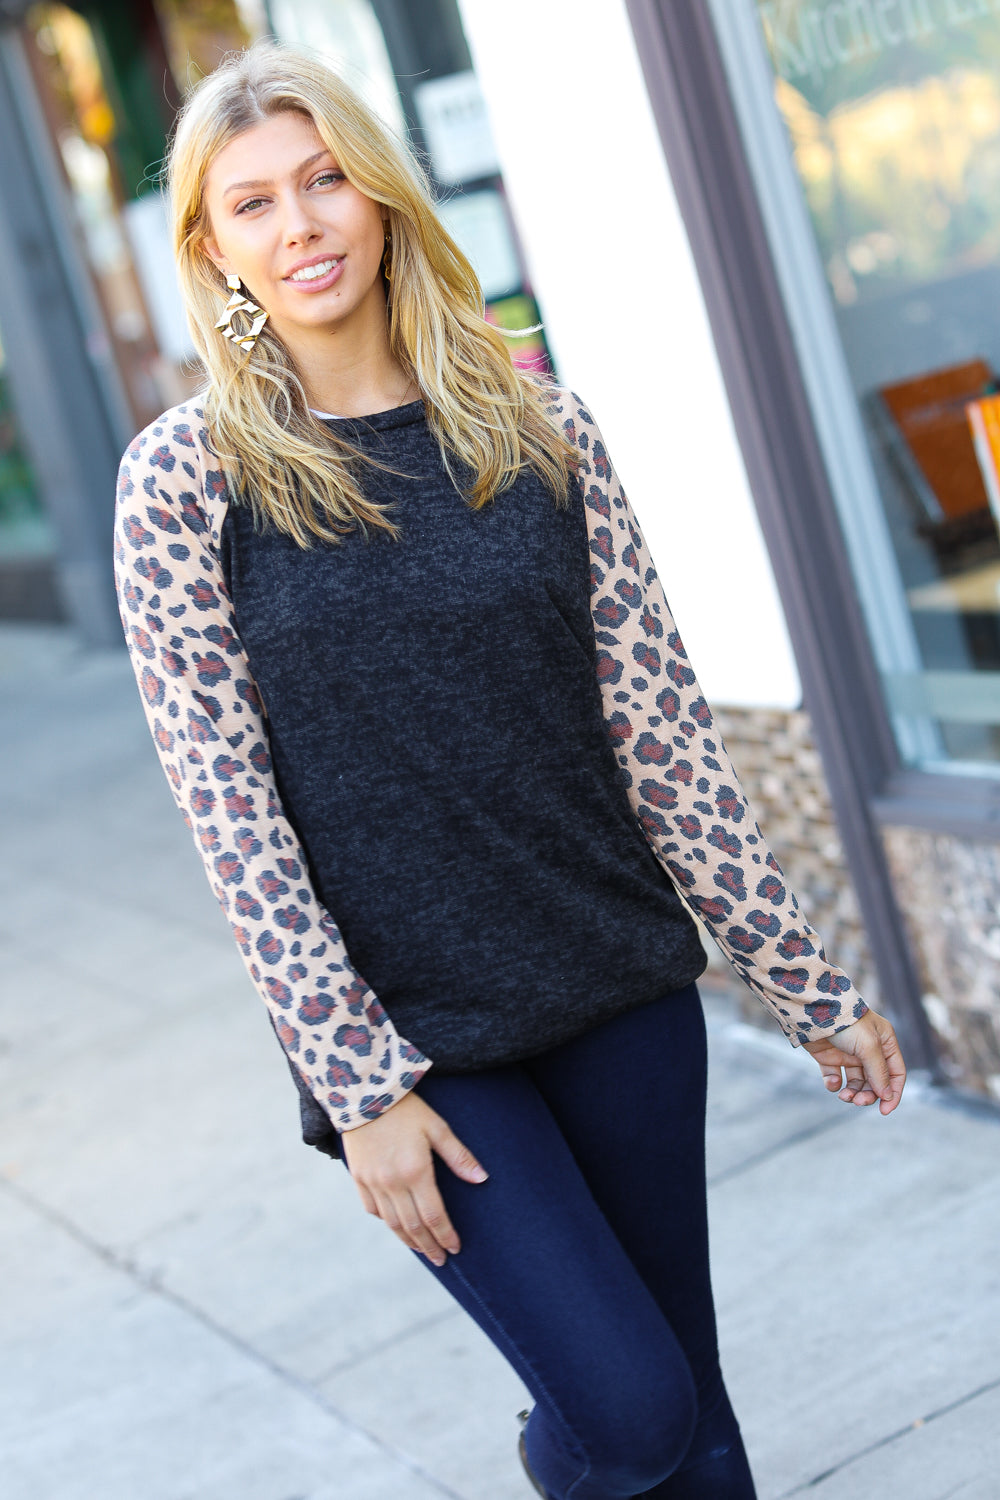 Smooth Sailing - Leopard-Sleeve Sweater Top